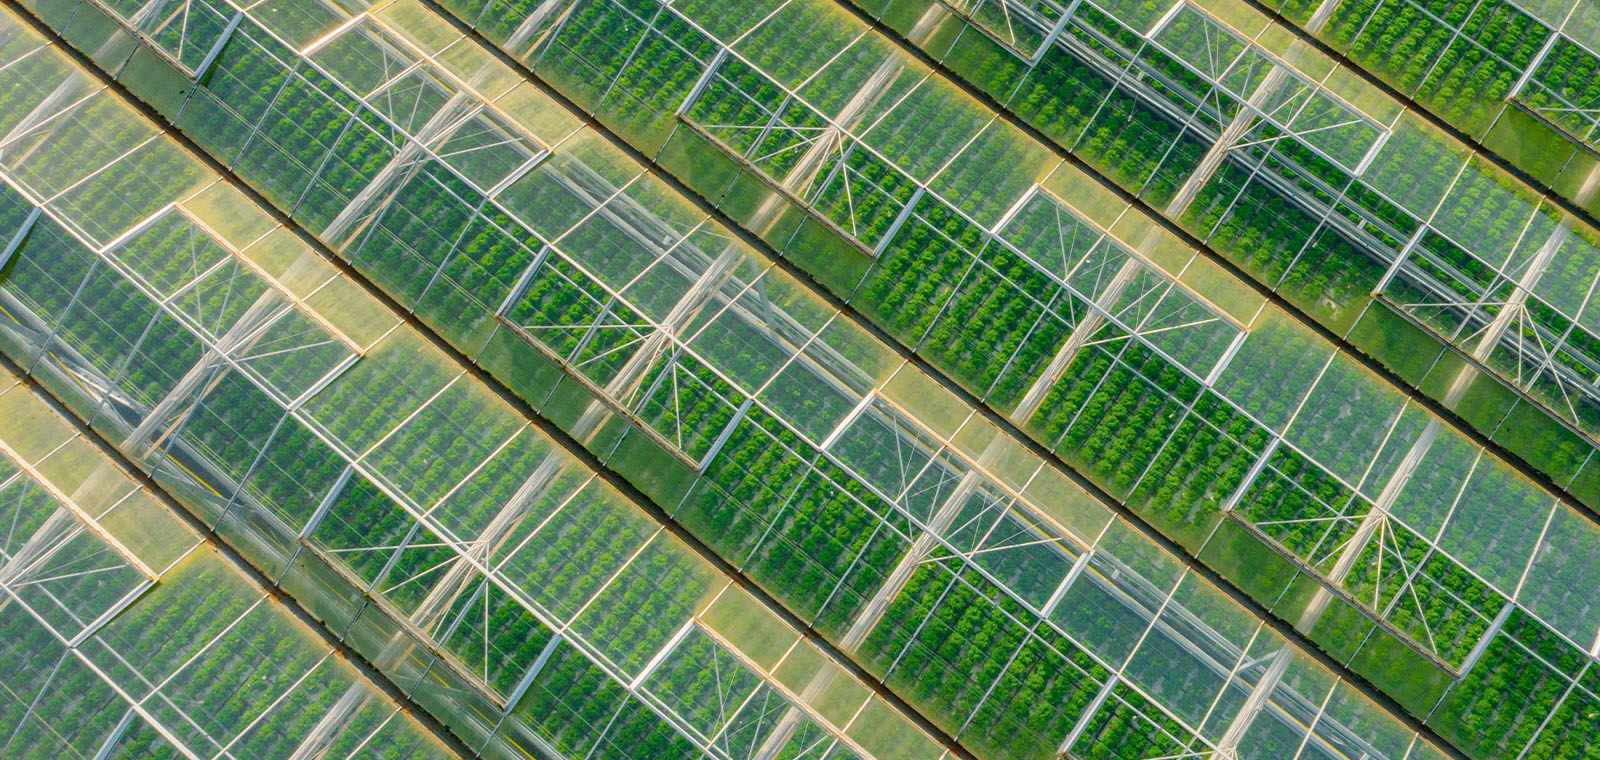 Uniform rows of plants grow under the shelter of glass canopies.